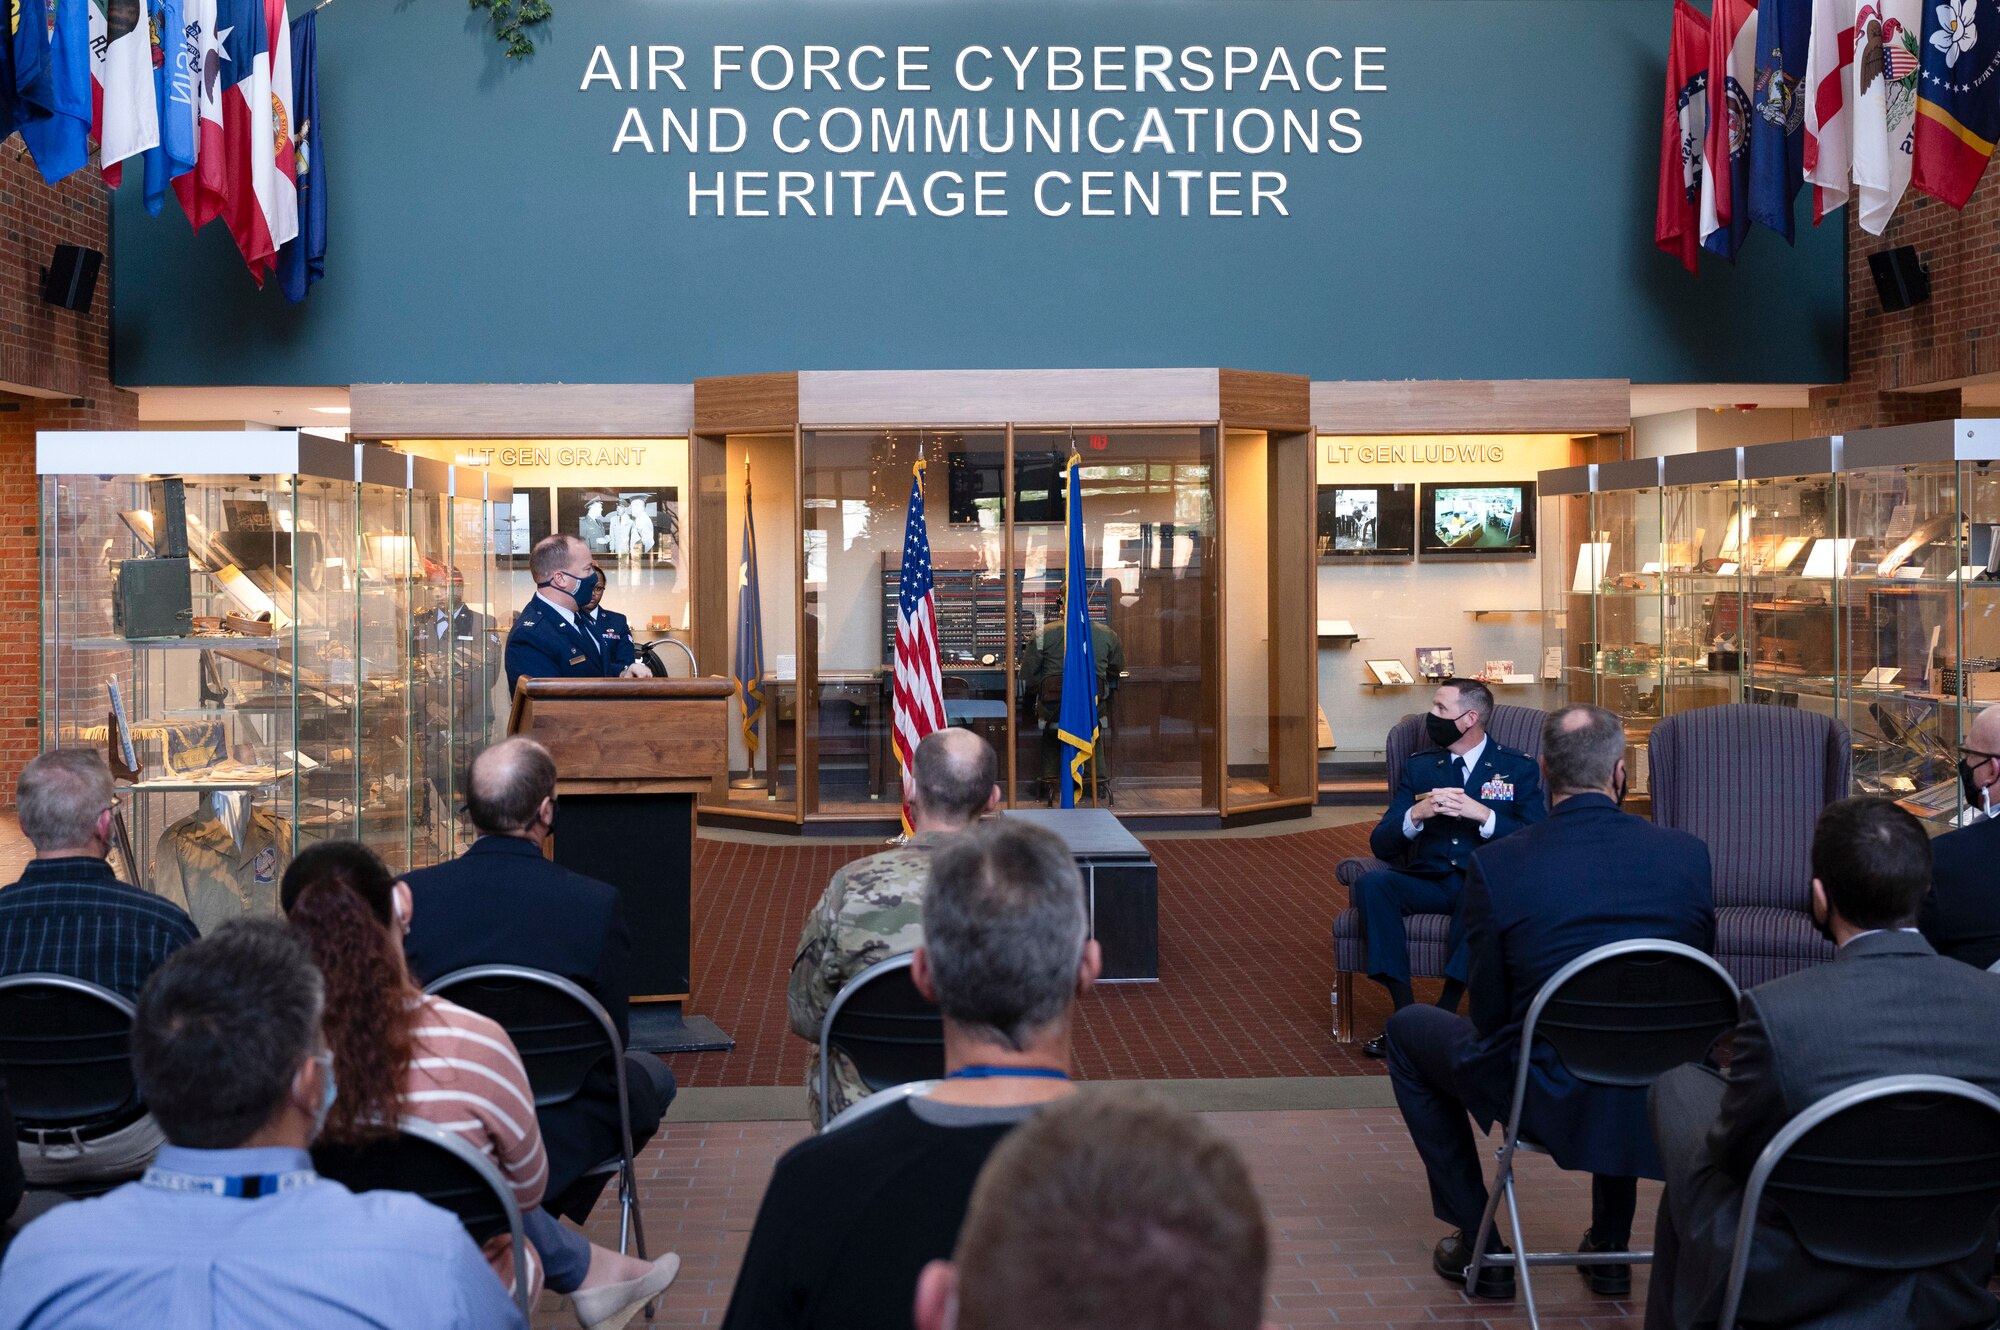 Col. Kevin Kirsch, HQ Cyberspace Capabilities Center commander, talks about the accomplishments of the Executive Airlift Communications Network team during a ceremony at the Air Force Cyberspace and Communications Heritage Center at Scott Air Force Base, Illinois, Jan. 4, 2021. The EACN team were tasked with improving in-flight communications and capabilities that support senior leadership. (U.S. Air Force photo by Staff Sgt. Dalton Williams)